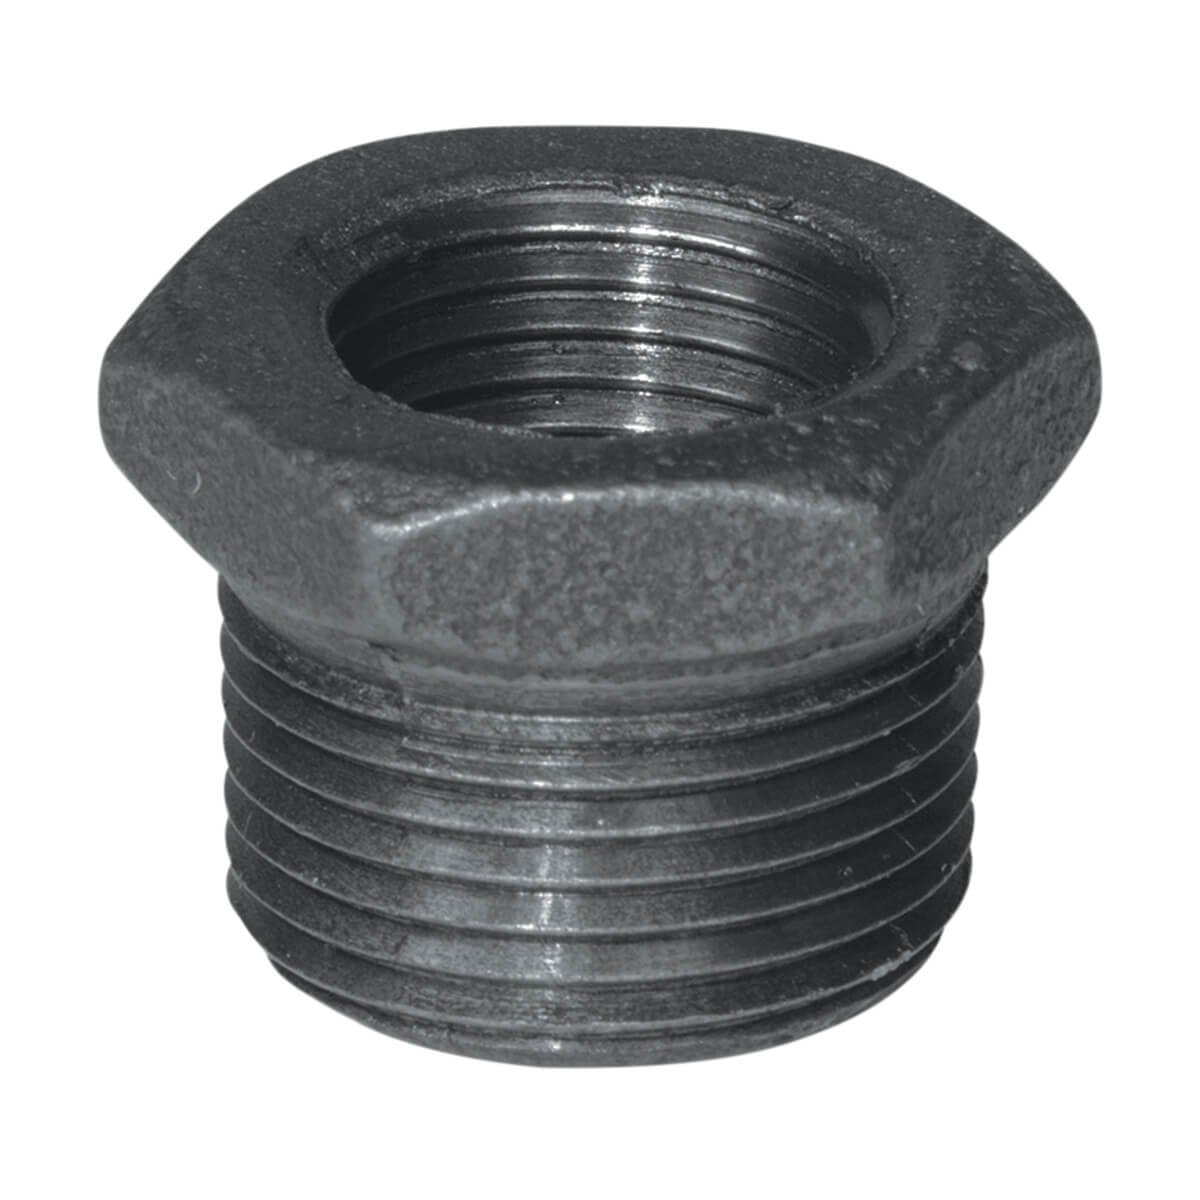 Fitting Black Iron Hex Bushing - 1-1/4-in x 3/4-in